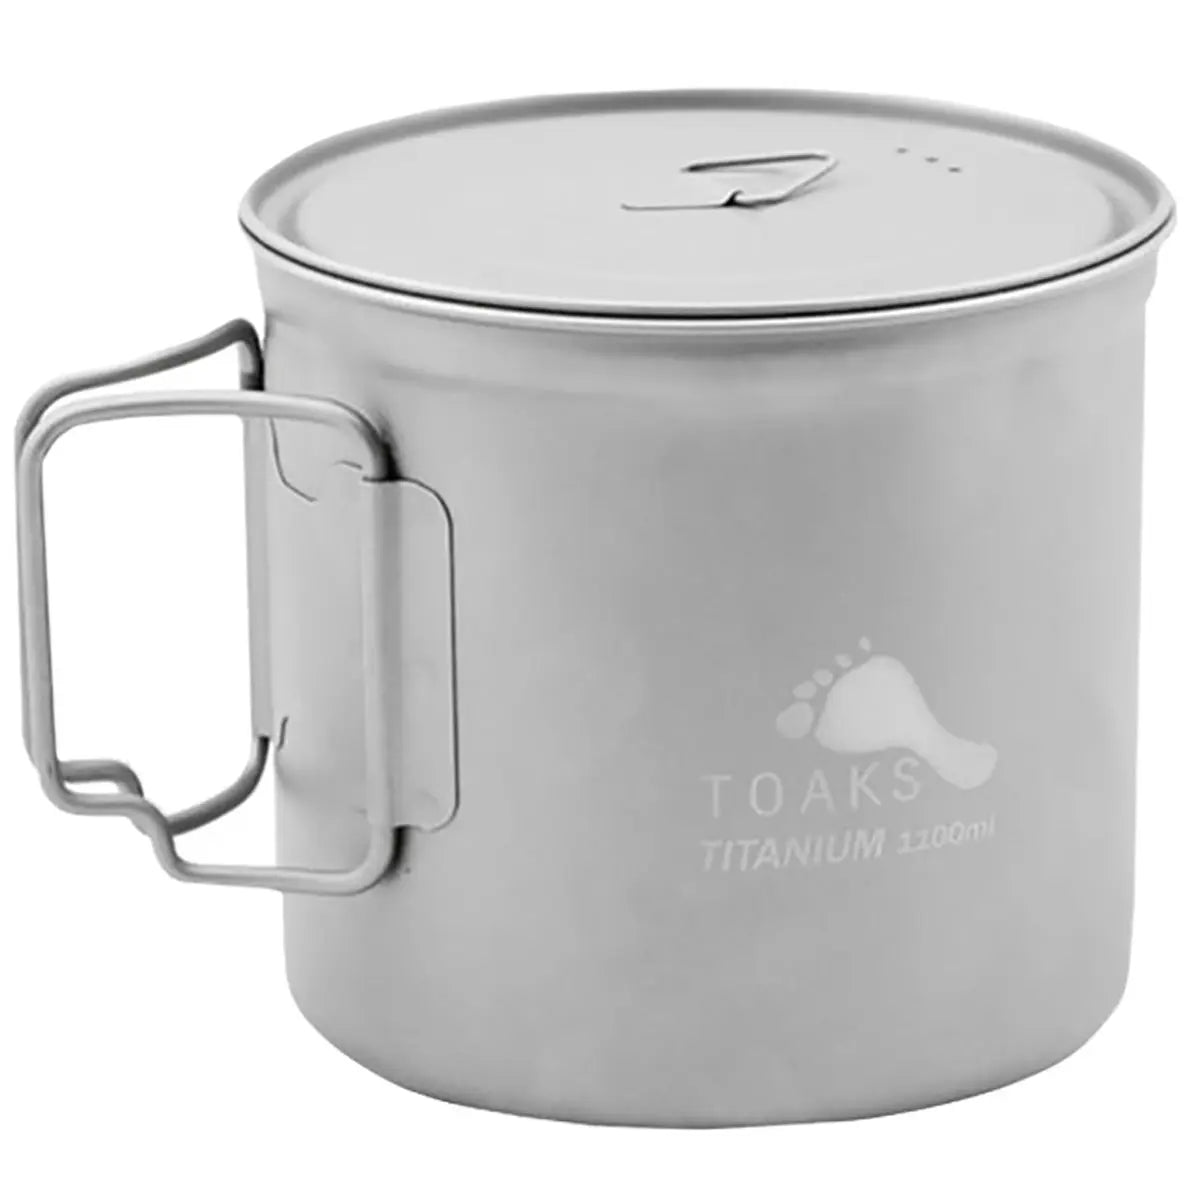 TOAKS Ultralight Titanium Camping Cook Pot with Foldable Handles and Lid TOAKS